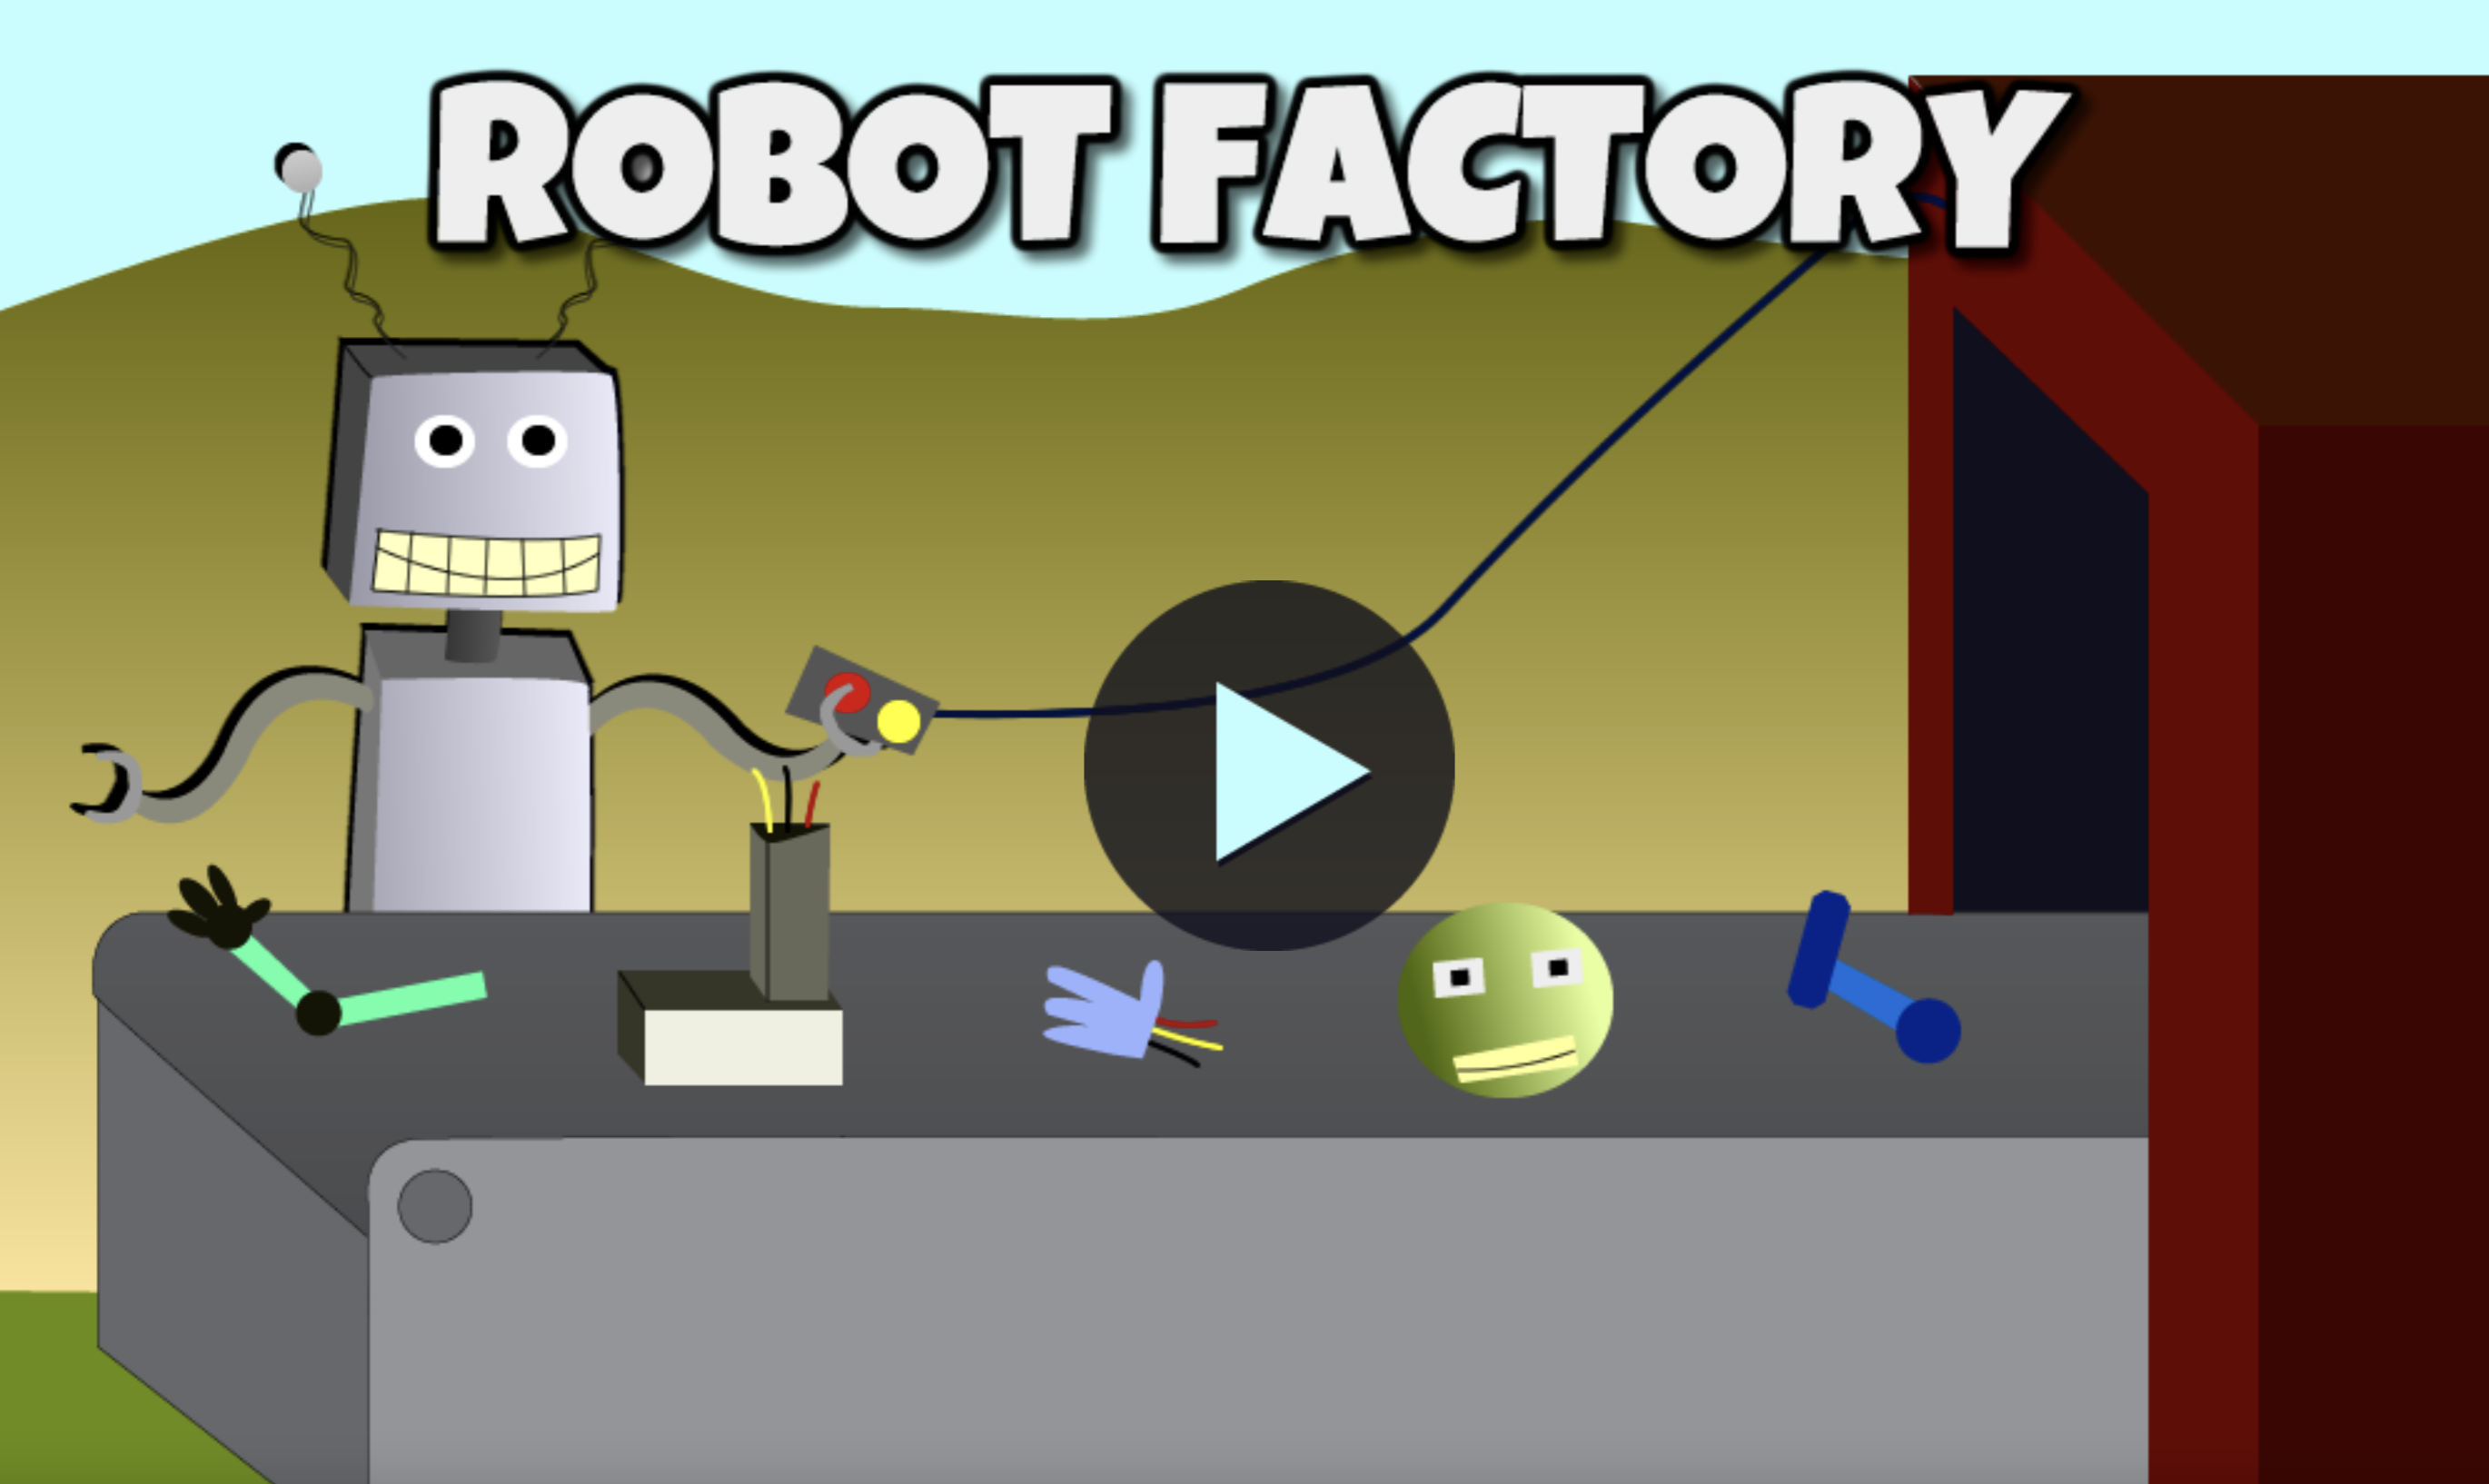 Robot Factory word problems game